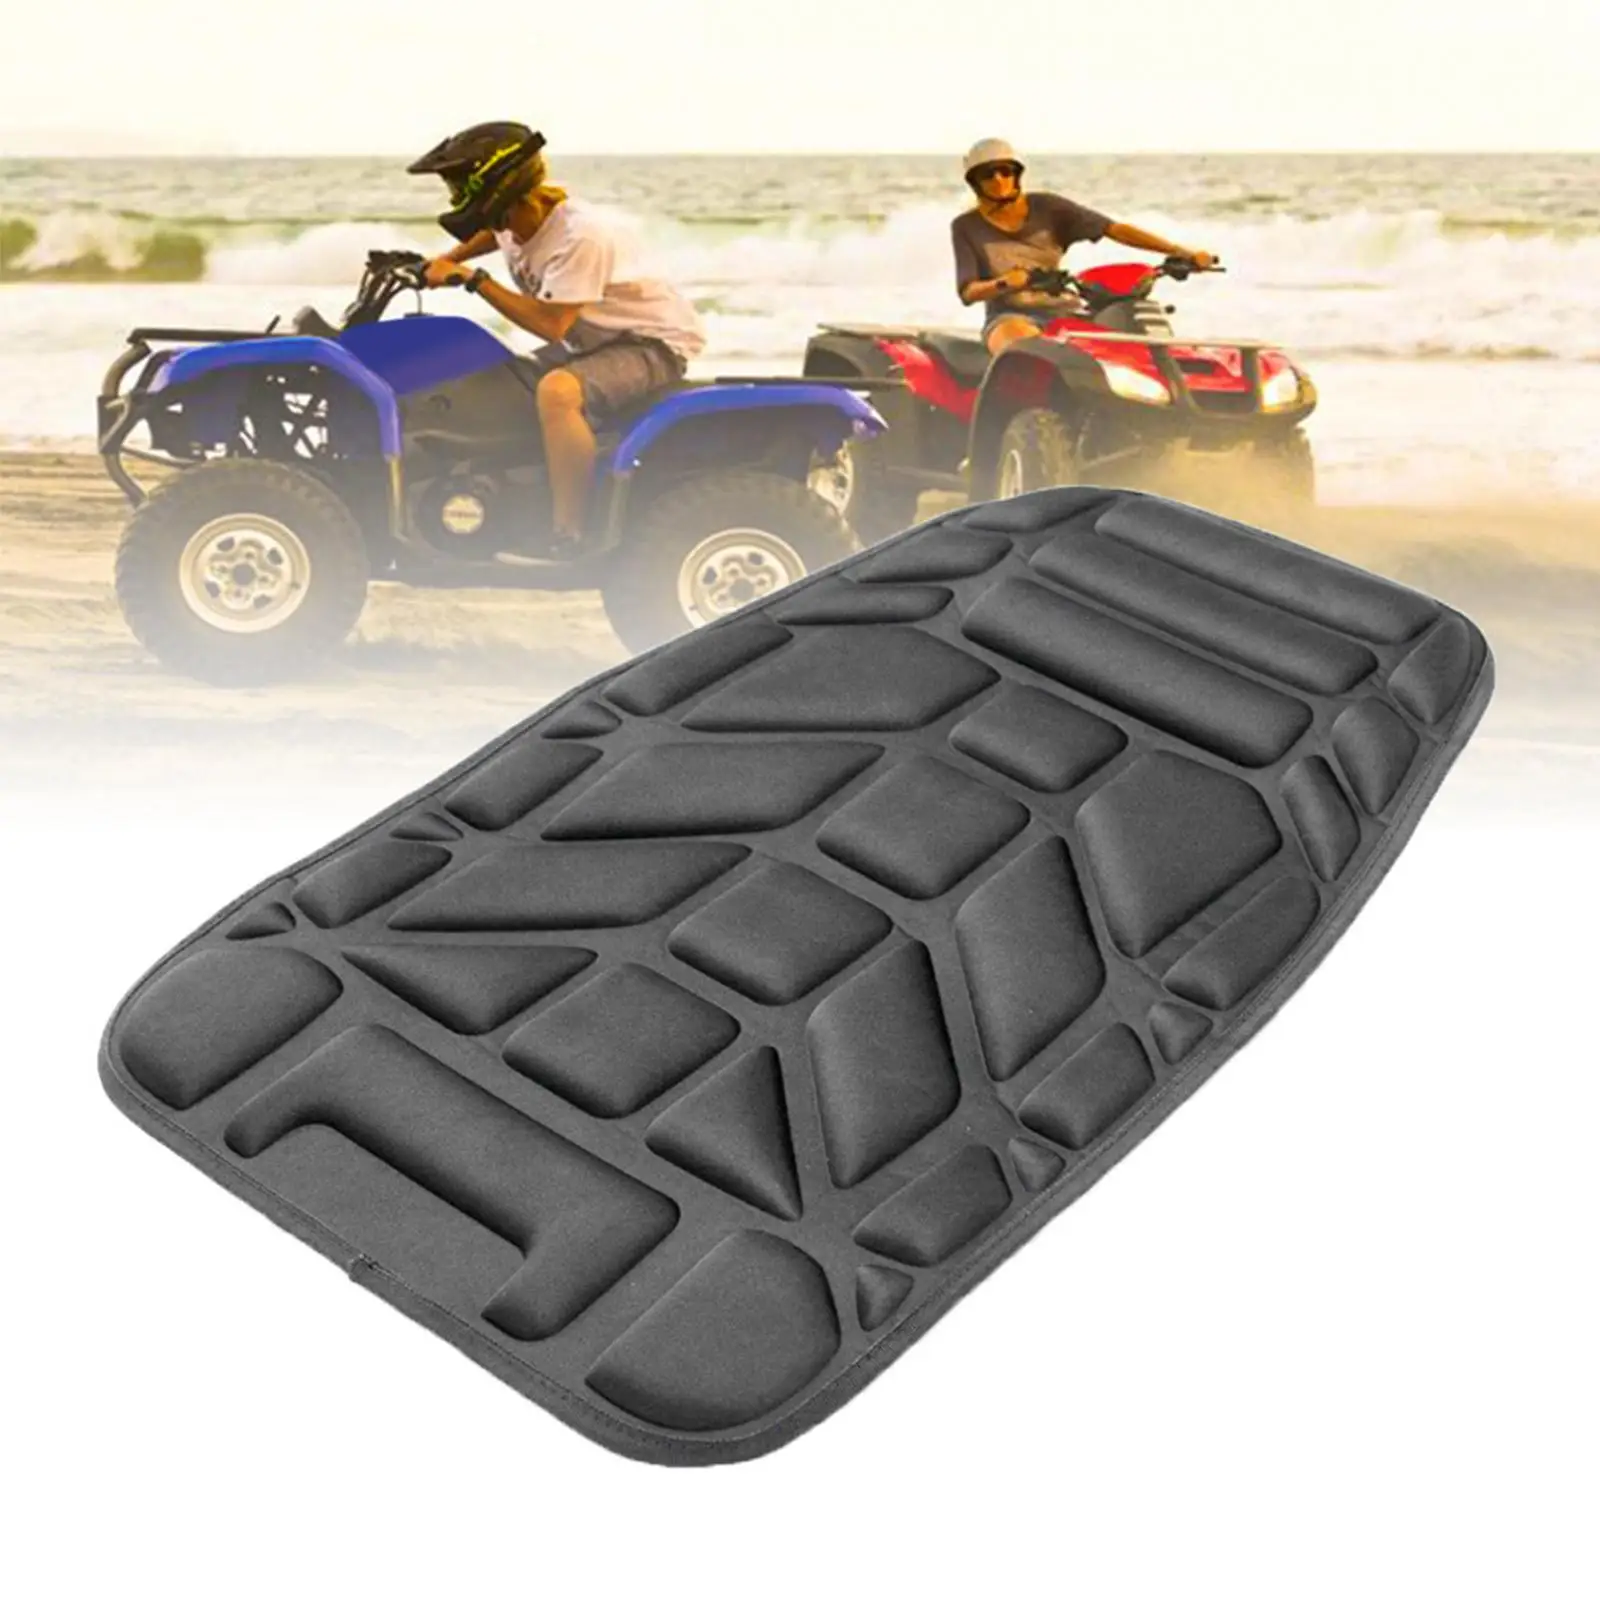 Beach Motorcycle Seat Cover Cushion Sunscreen Summer for ATV 